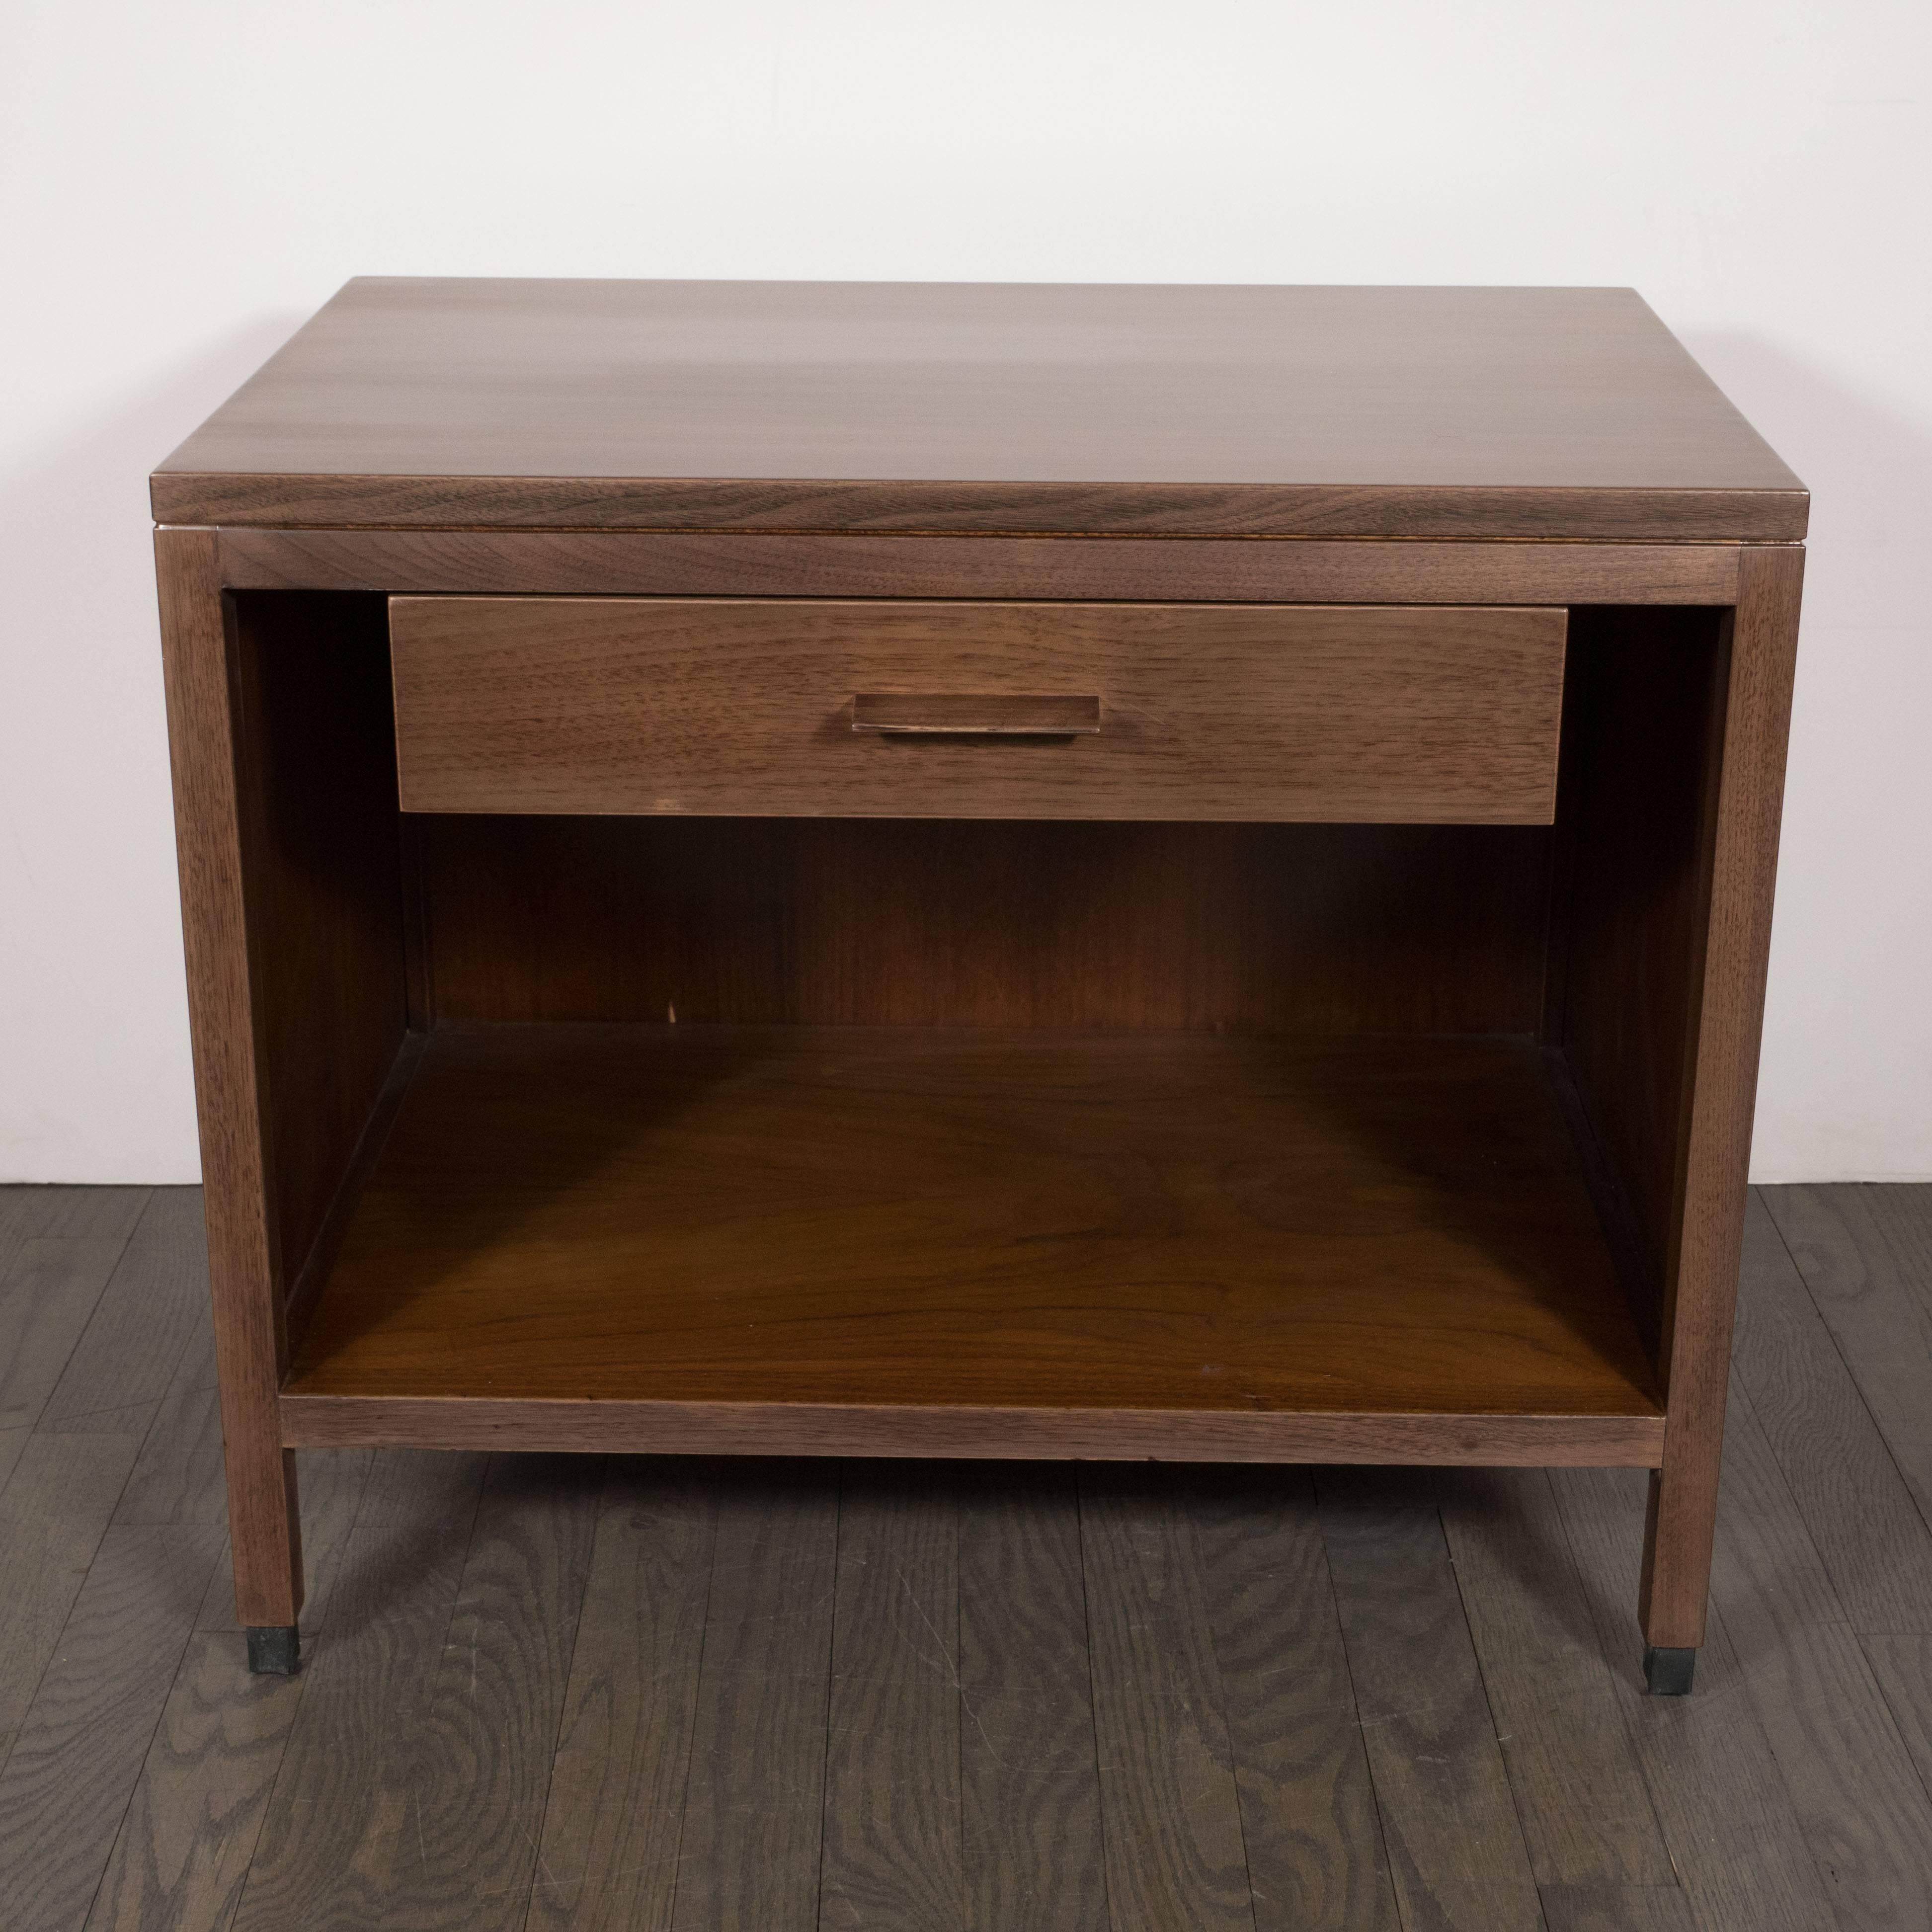 This pair of sophisticated Mid-Century Modern end tables or nightstands were realized in the United States, circa 1950. Realized from hand rubbed and bookmatched walnut with cane side panels and square skyscraper style black lacquer feet, they